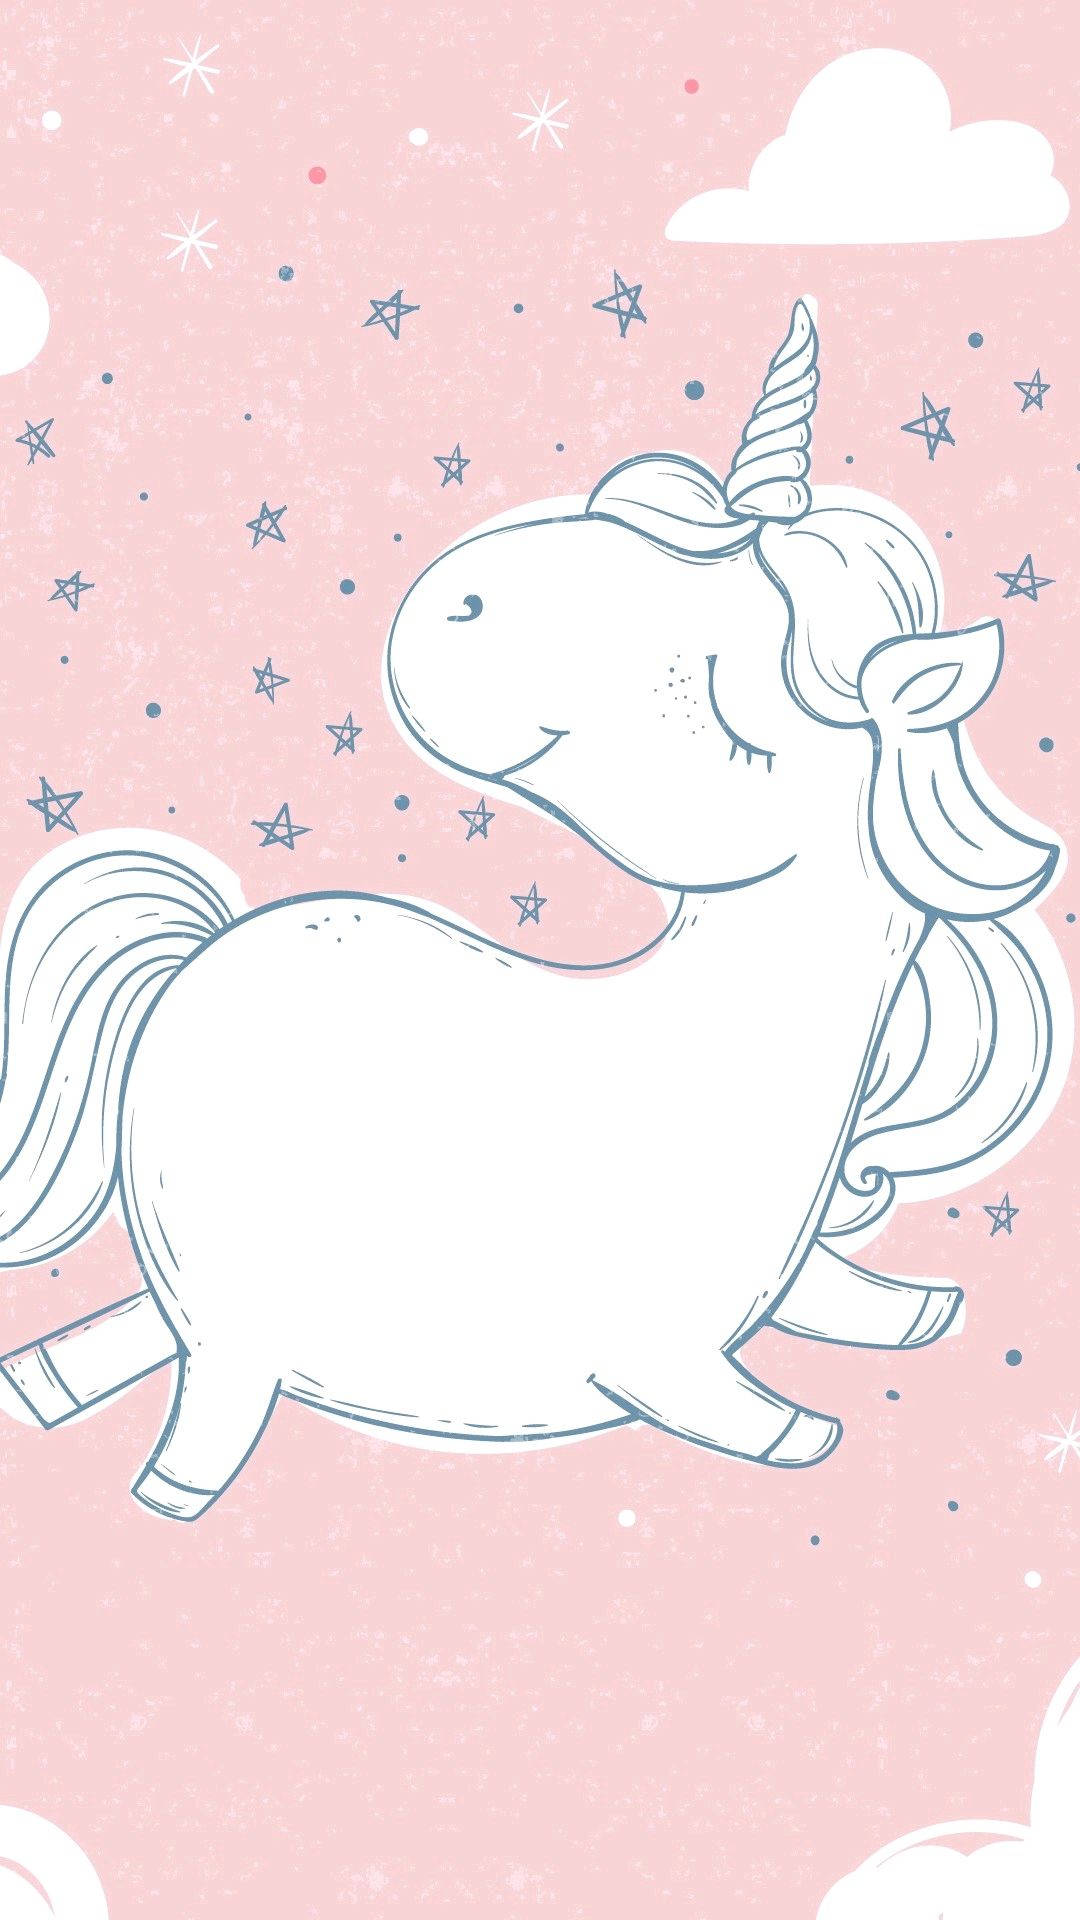 Make your dreams come true with this magical unicorn! Wallpaper